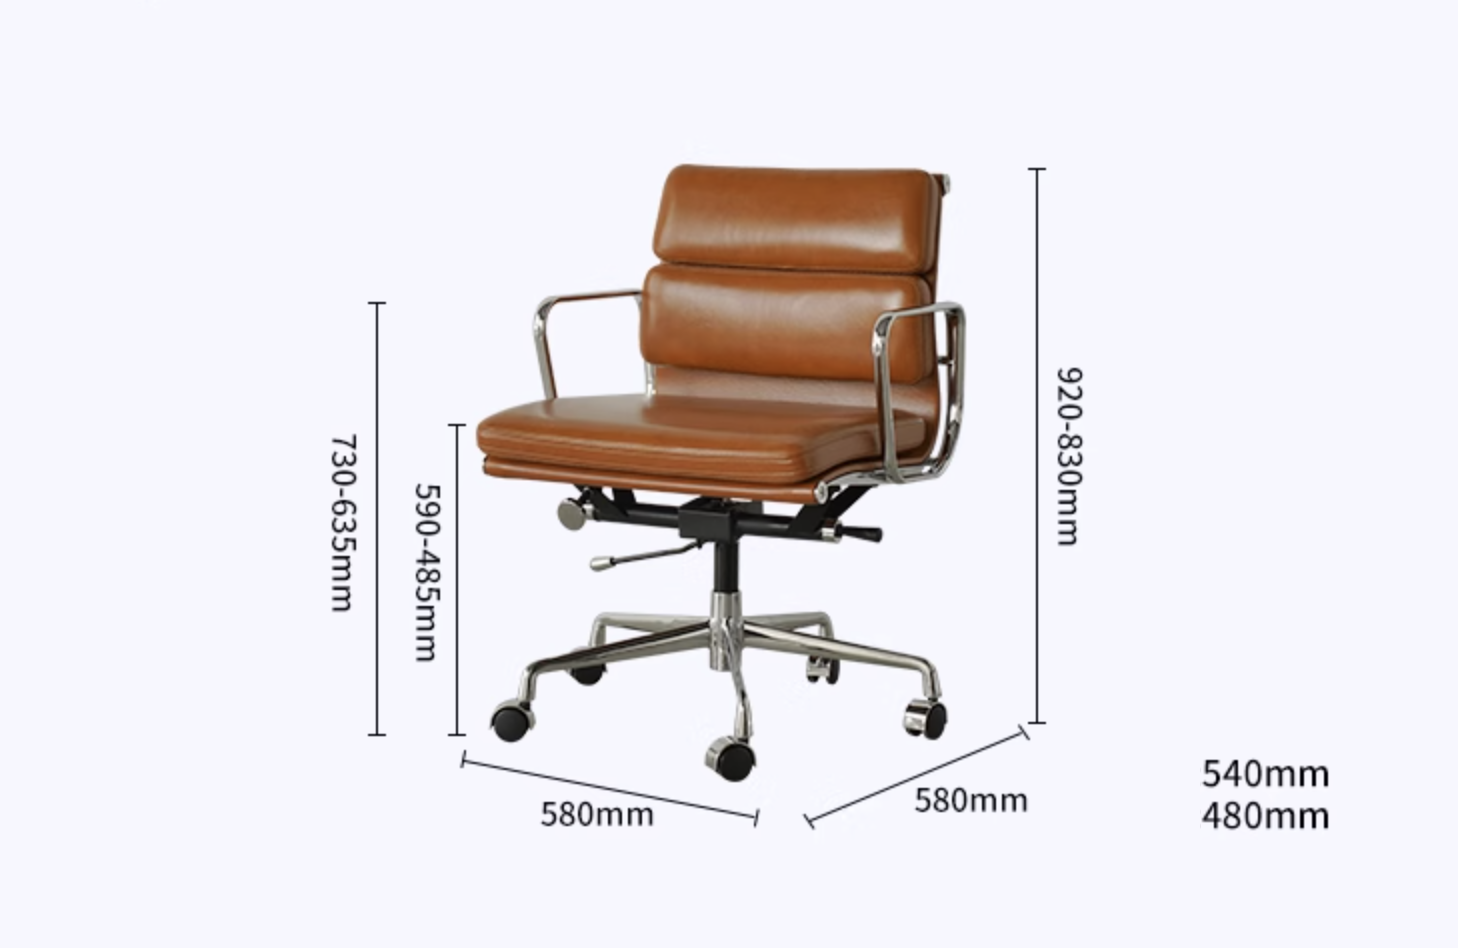 Marley Office Chair With Swivel, Lift